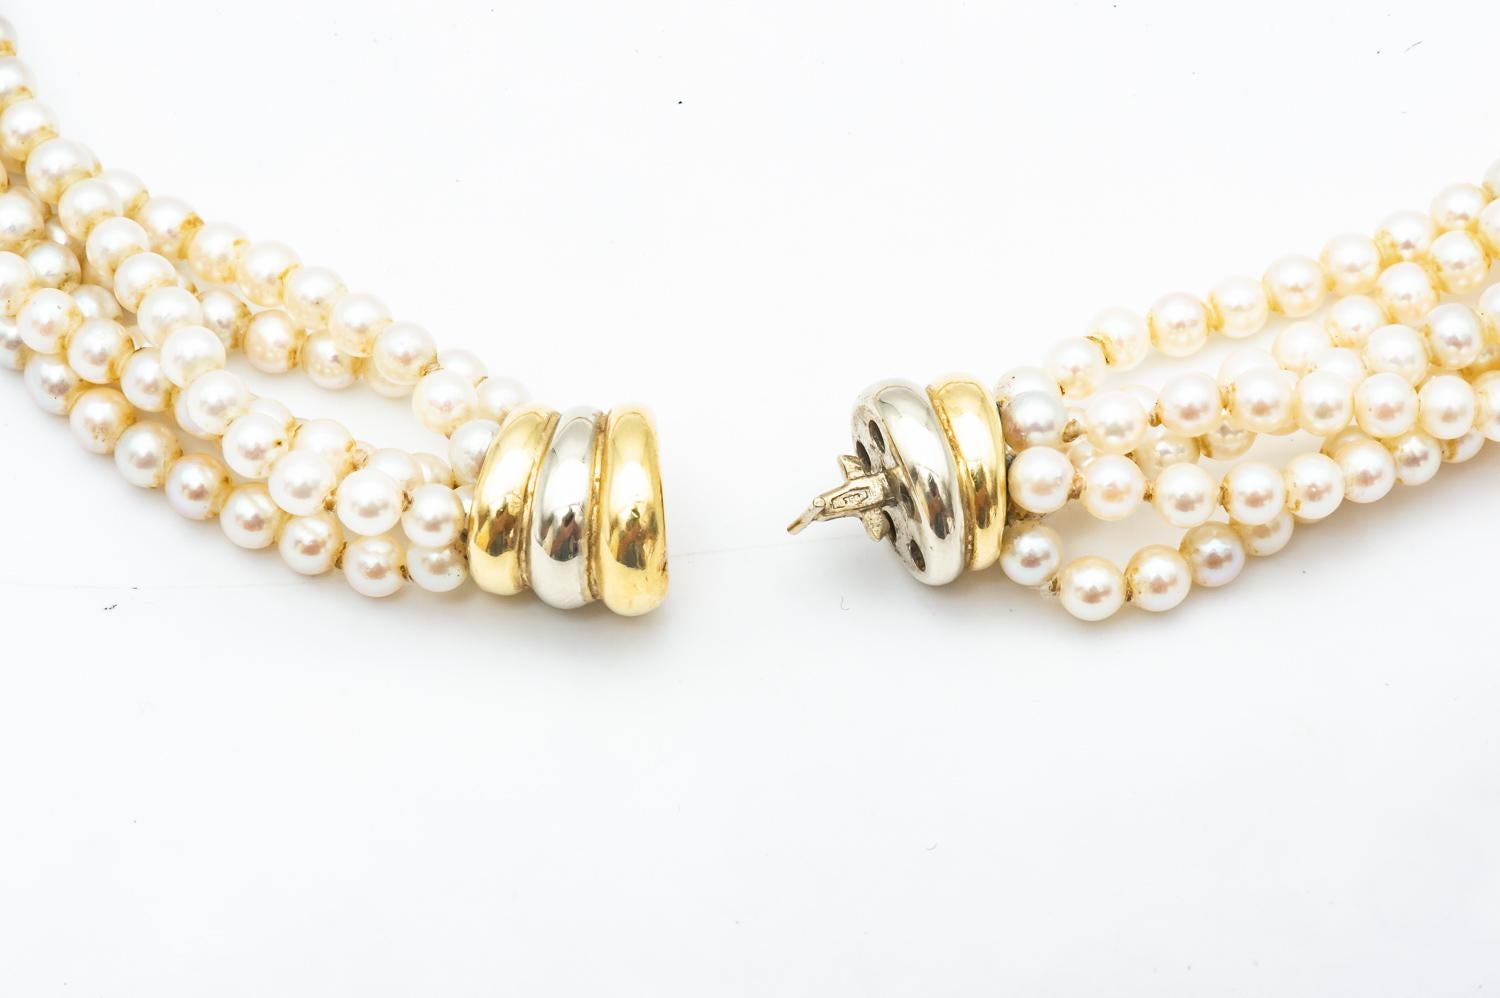 Bead 6 Row Cultured Pearls Necklace with 18K Yellow and White Gold Clasp